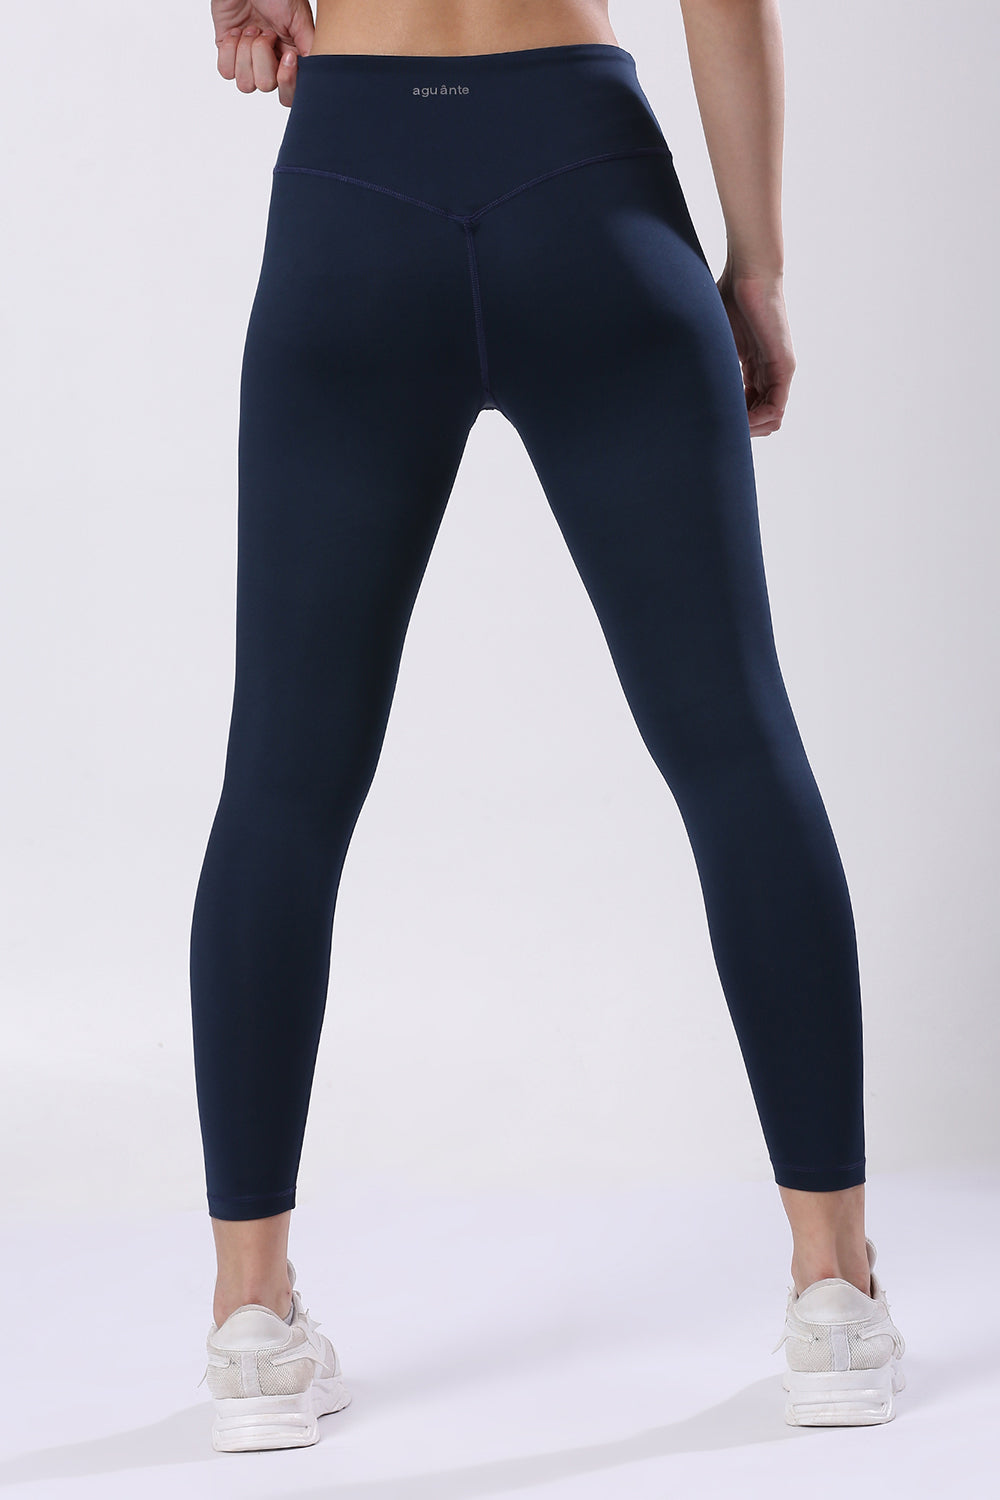 Women's Core Workout Tights